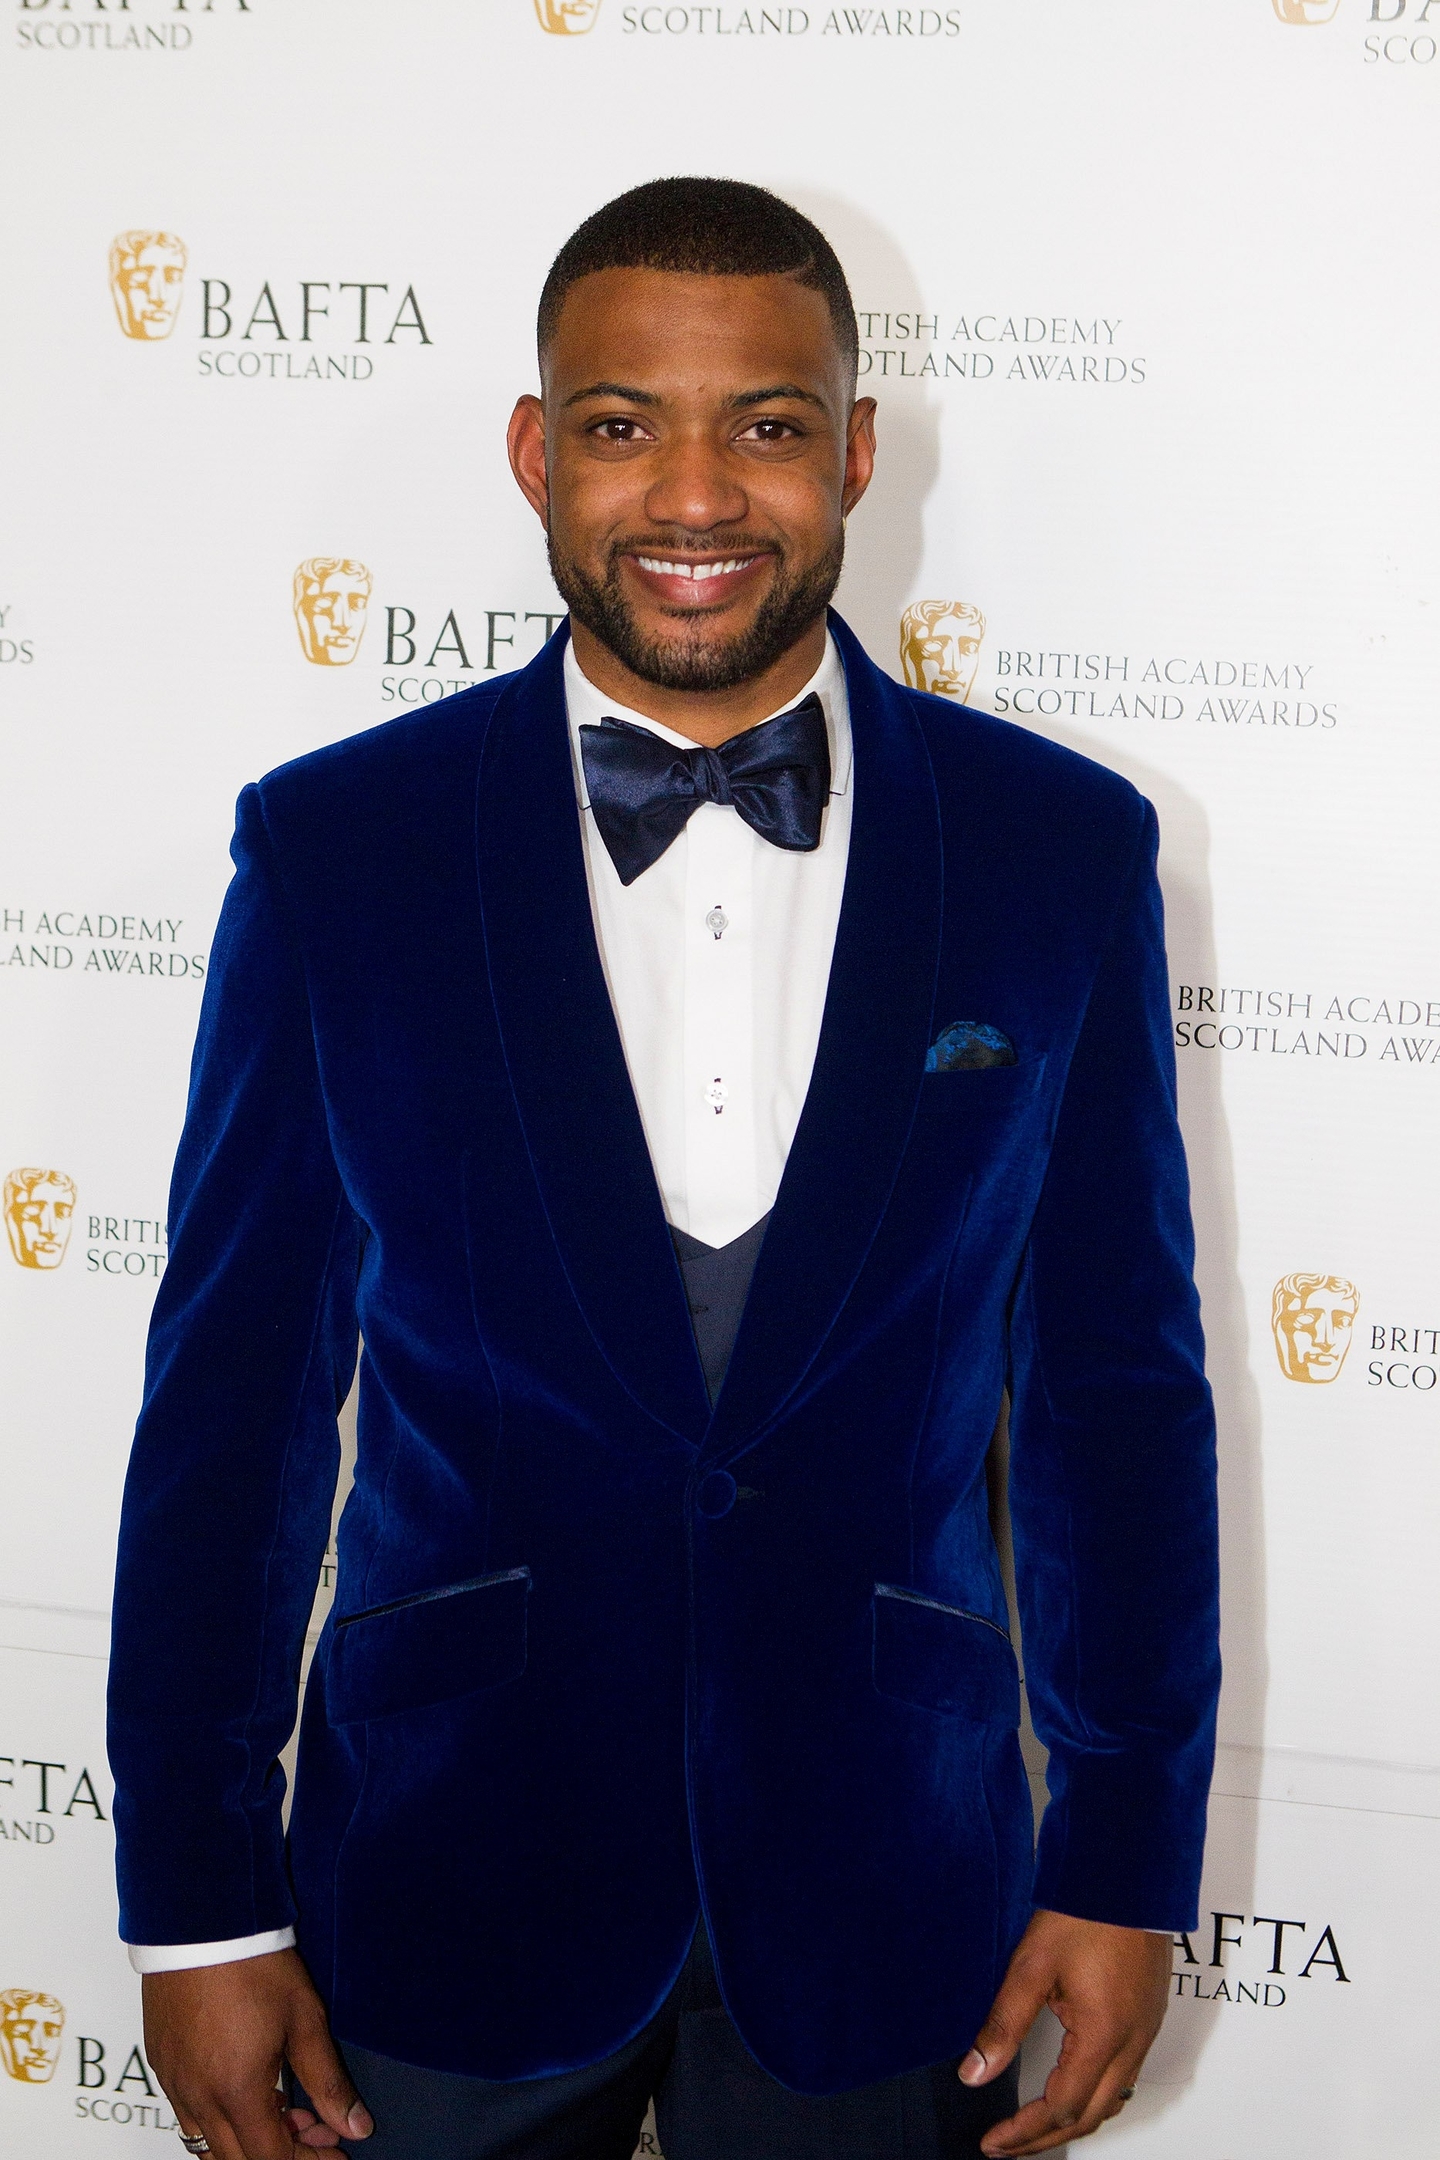 JB Gill on the red carpet at the BAFTA Scotland Awards held at the Radisson Blu, Glasgow. The awards honour the very best Scottish talent in film, television and video games industries. Nov 6 2016